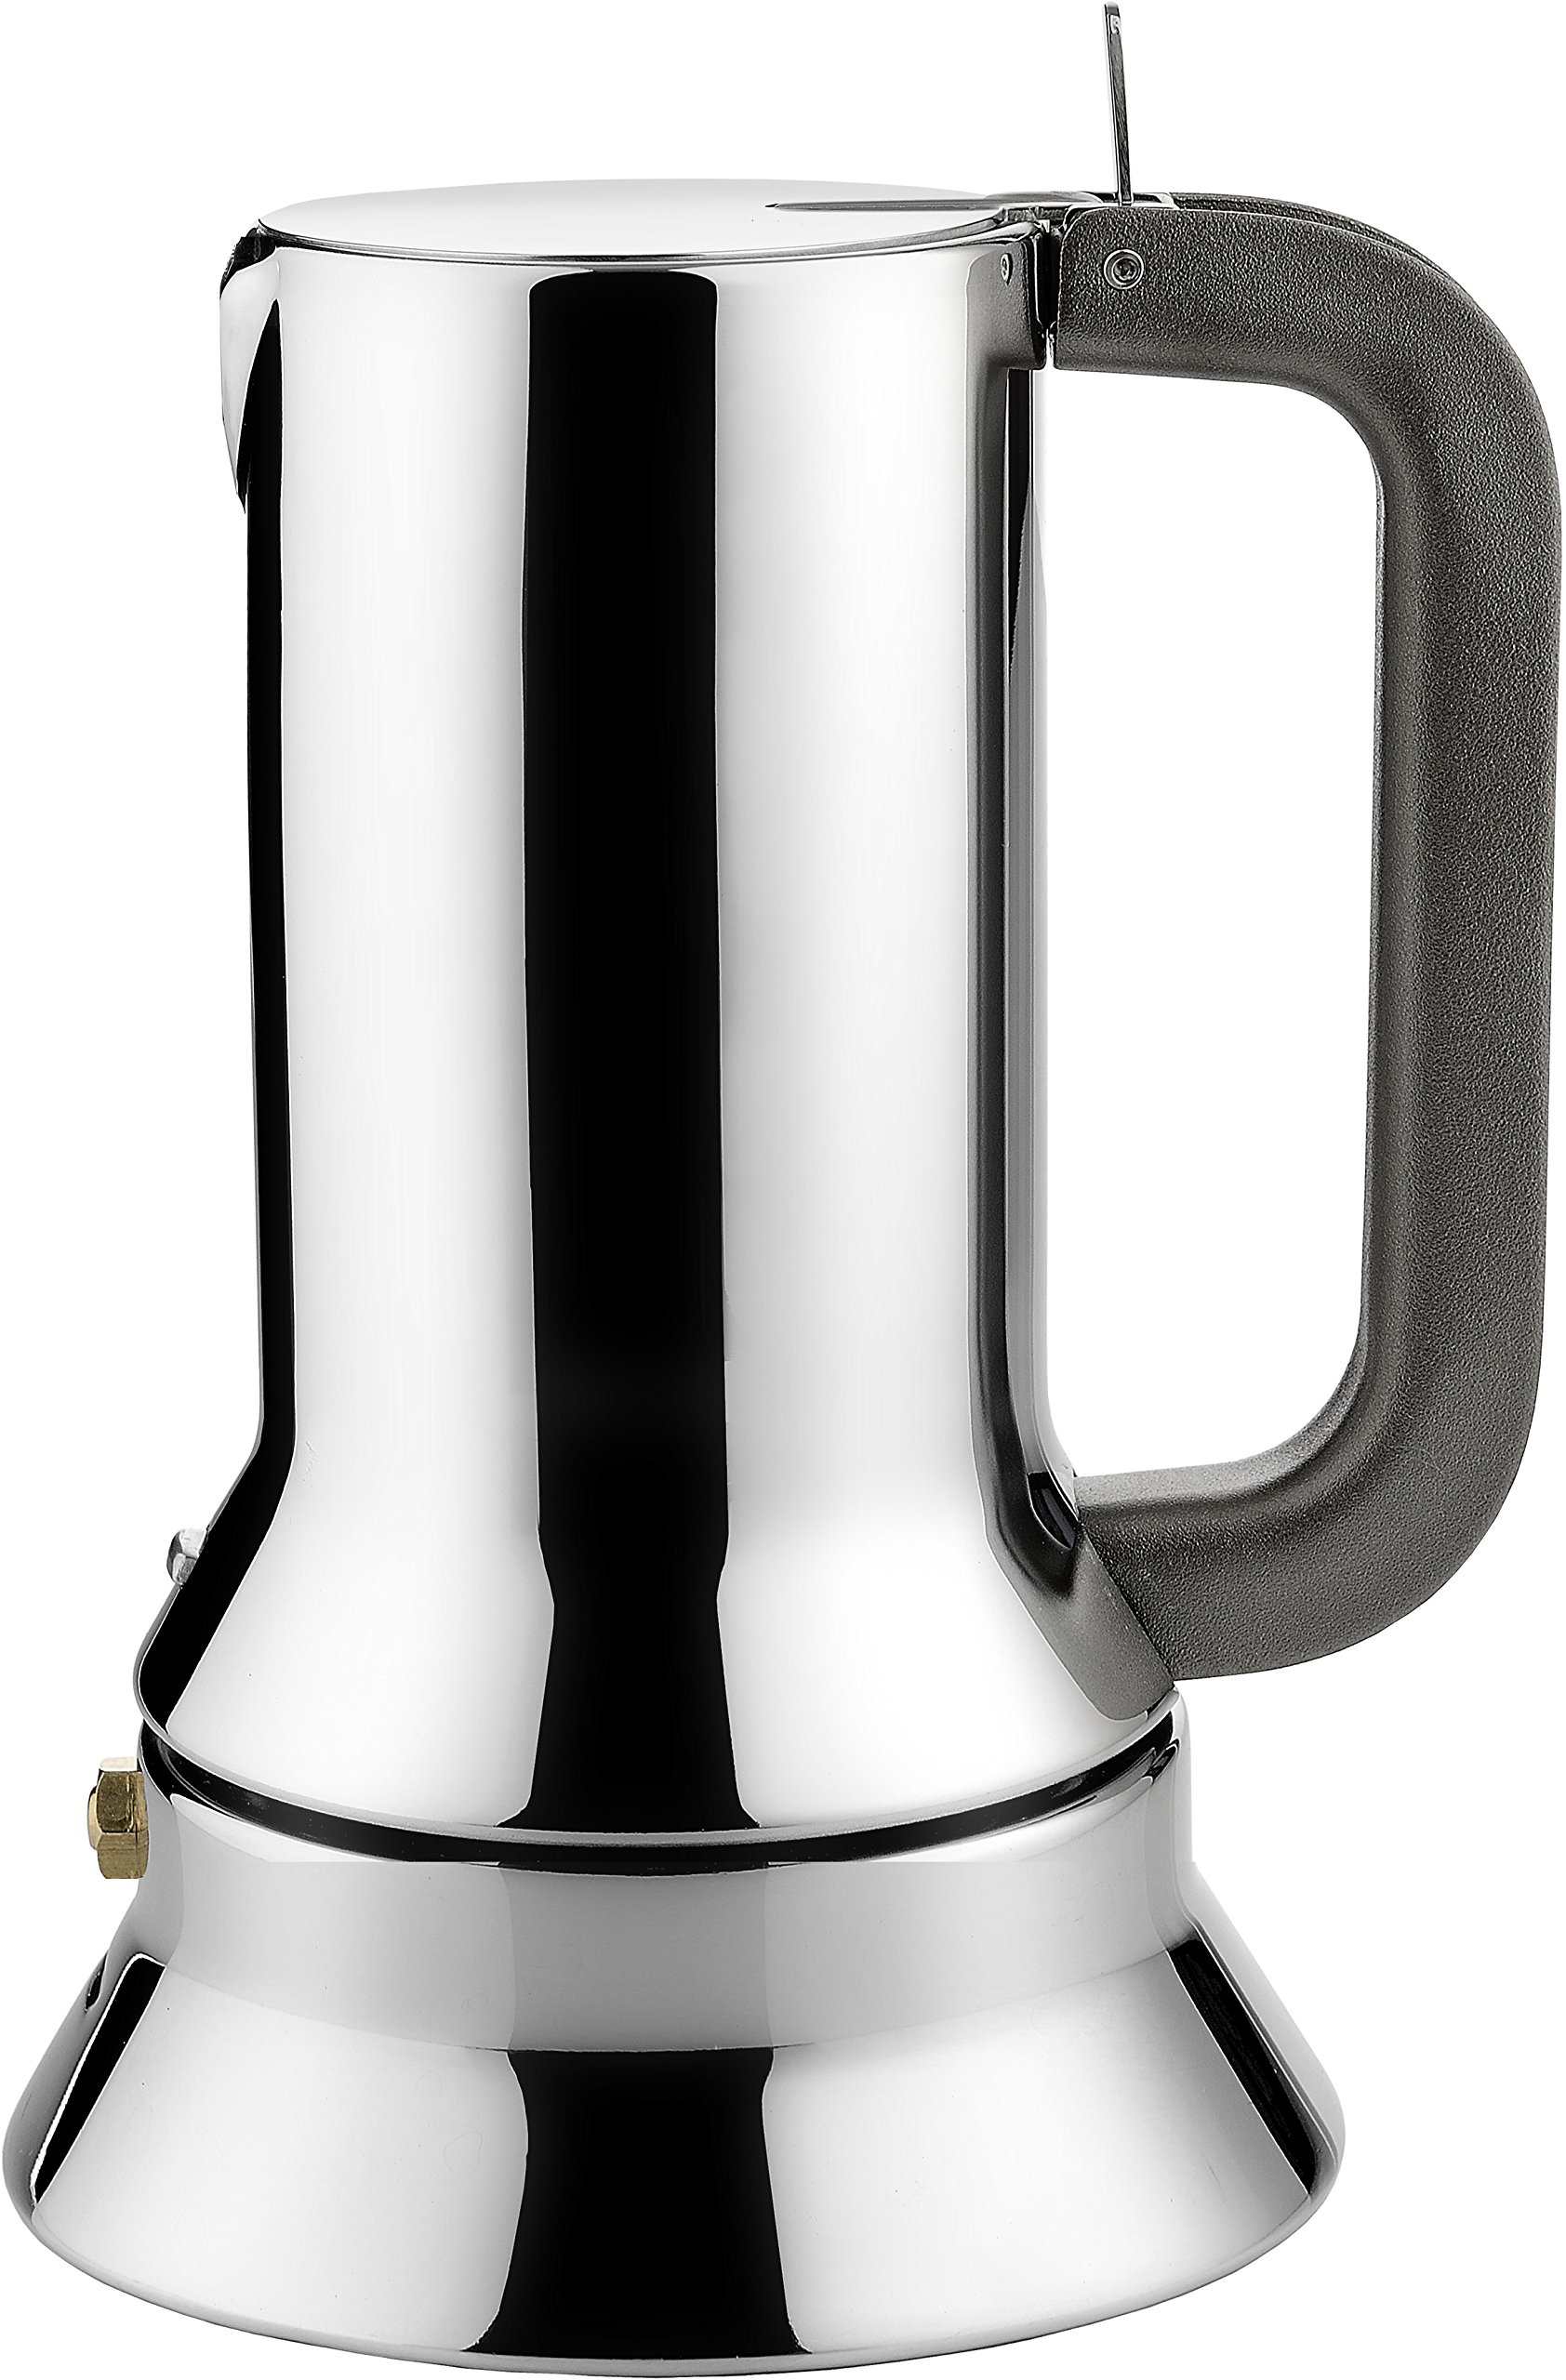 Alessi 9090/1 Stove Top Espresso 1 Cup Coffee Maker in 18/10 Stainless Steel Mirror Polished, Silver